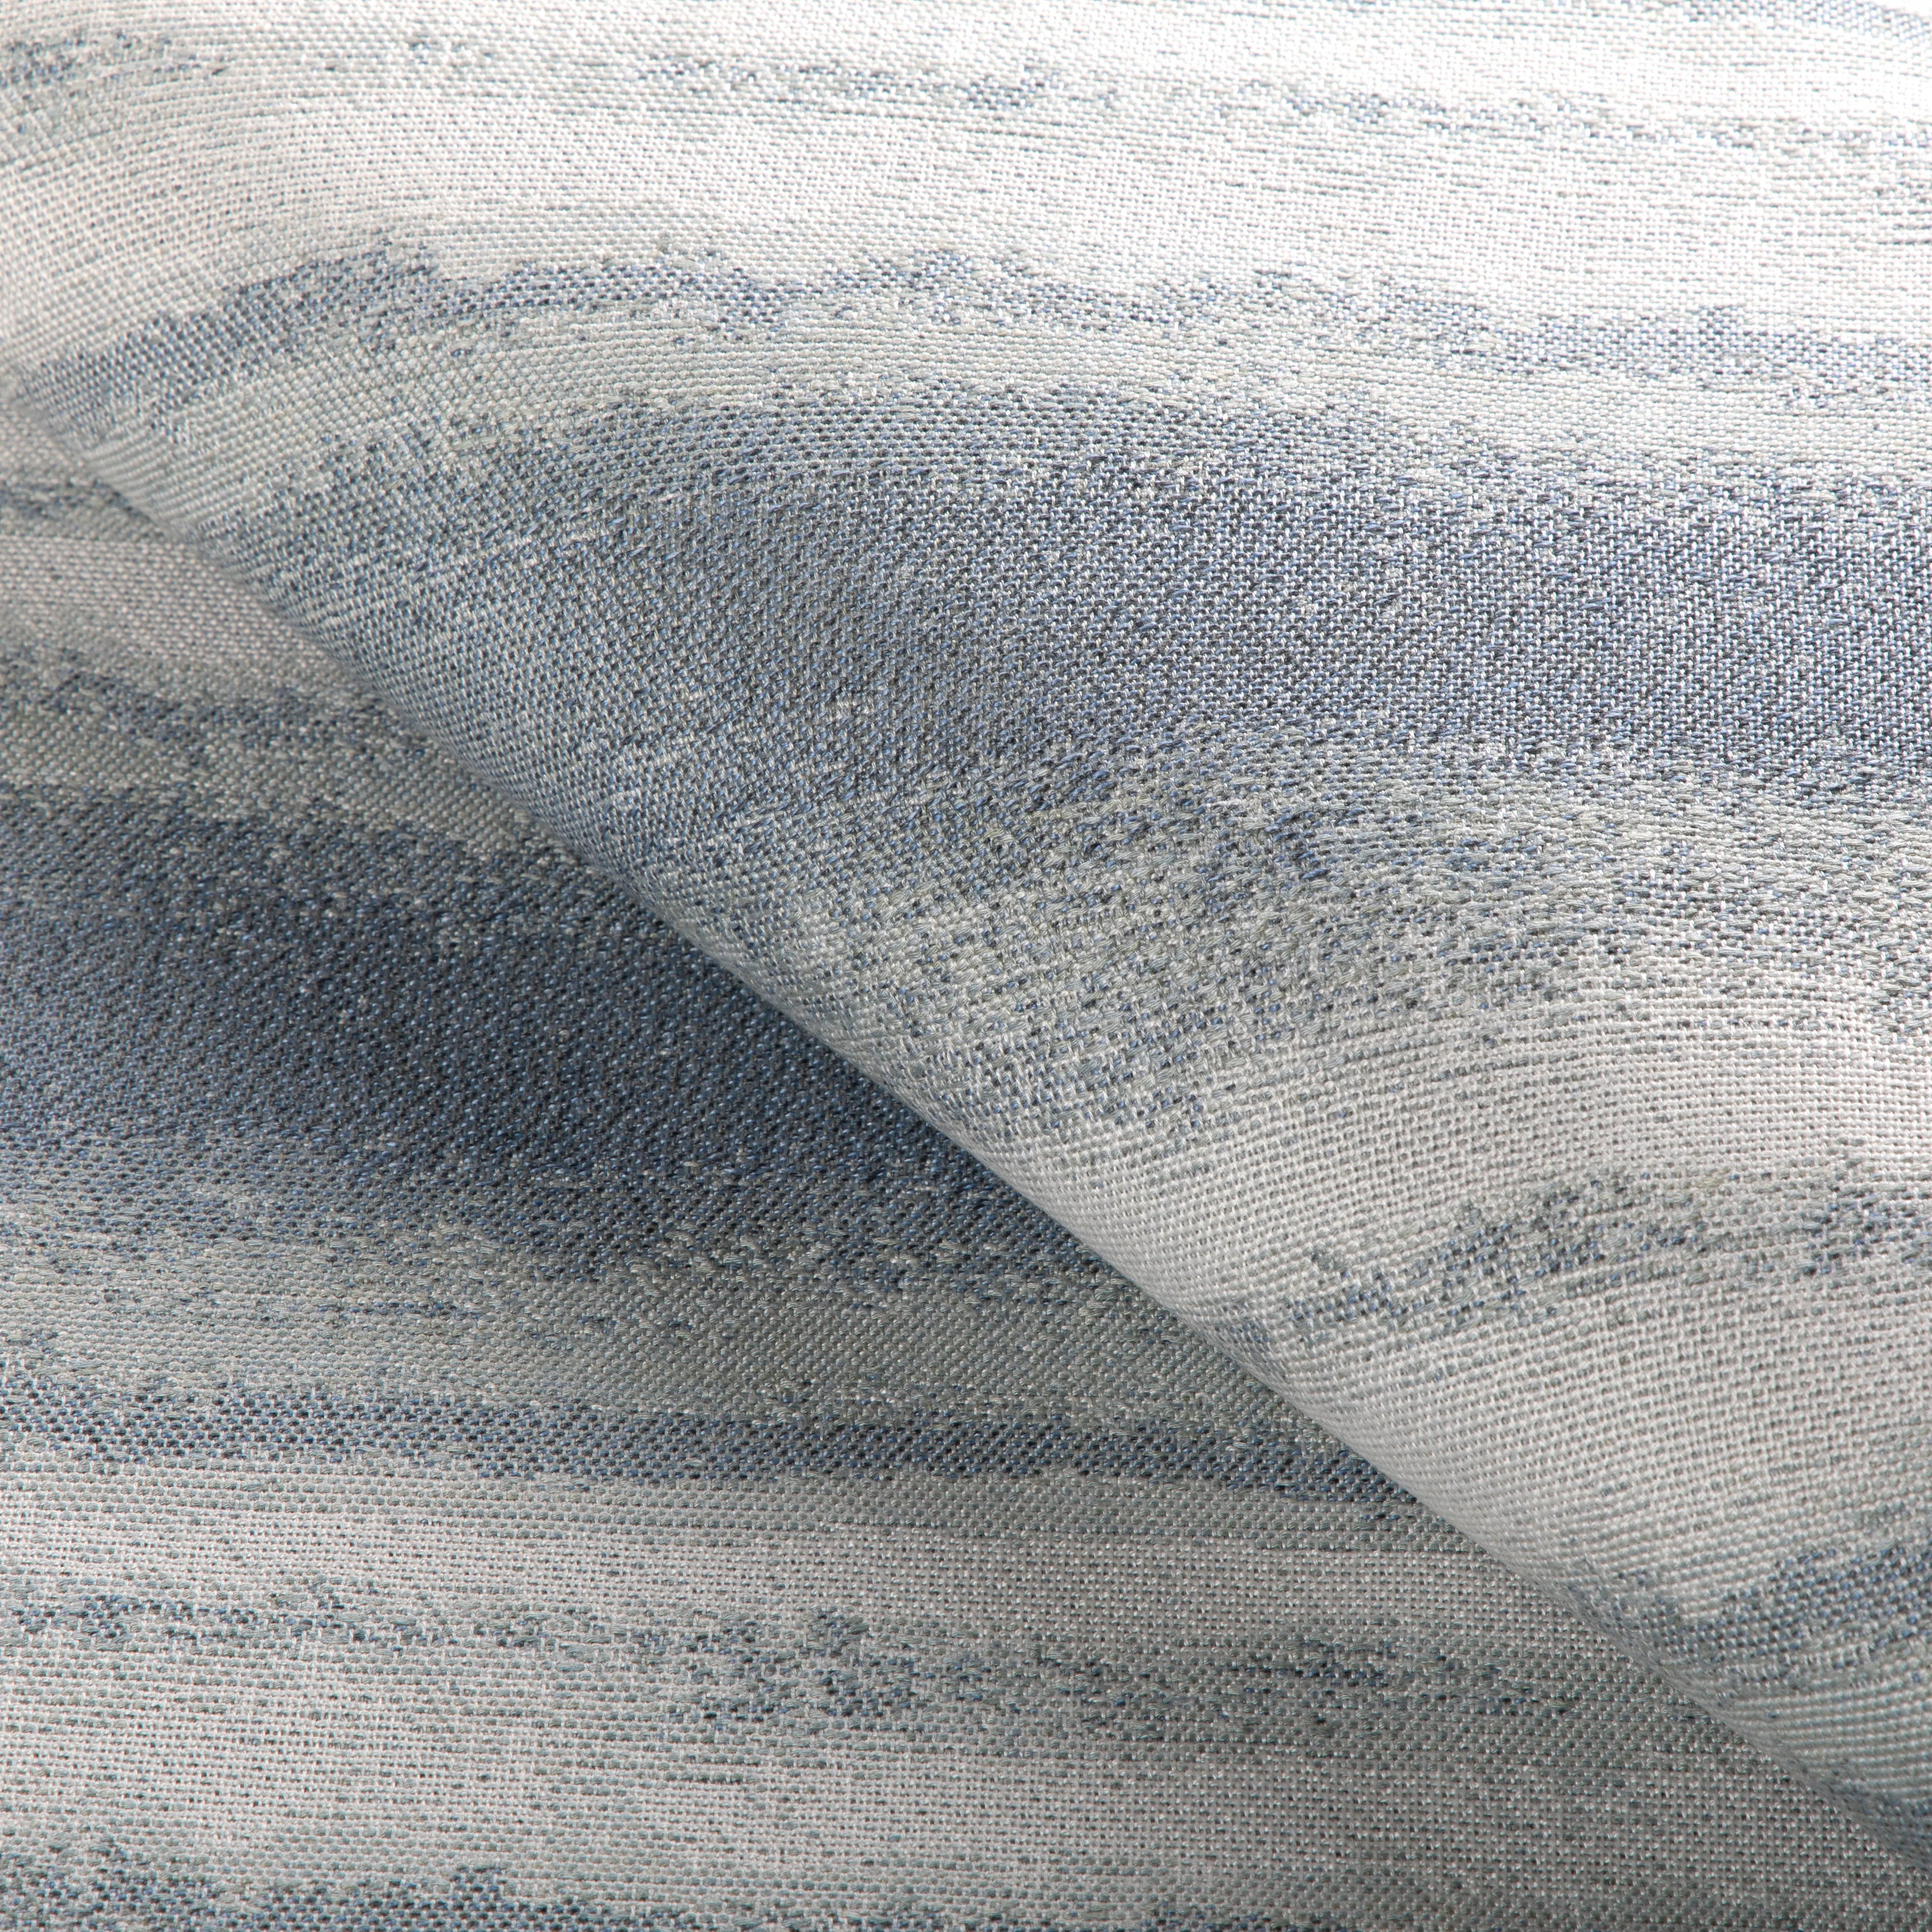 Fabric sample of Riverwalk fabric in ocean color - pattern 36932.15.0 - by Kravet Couture in the Riviera collection